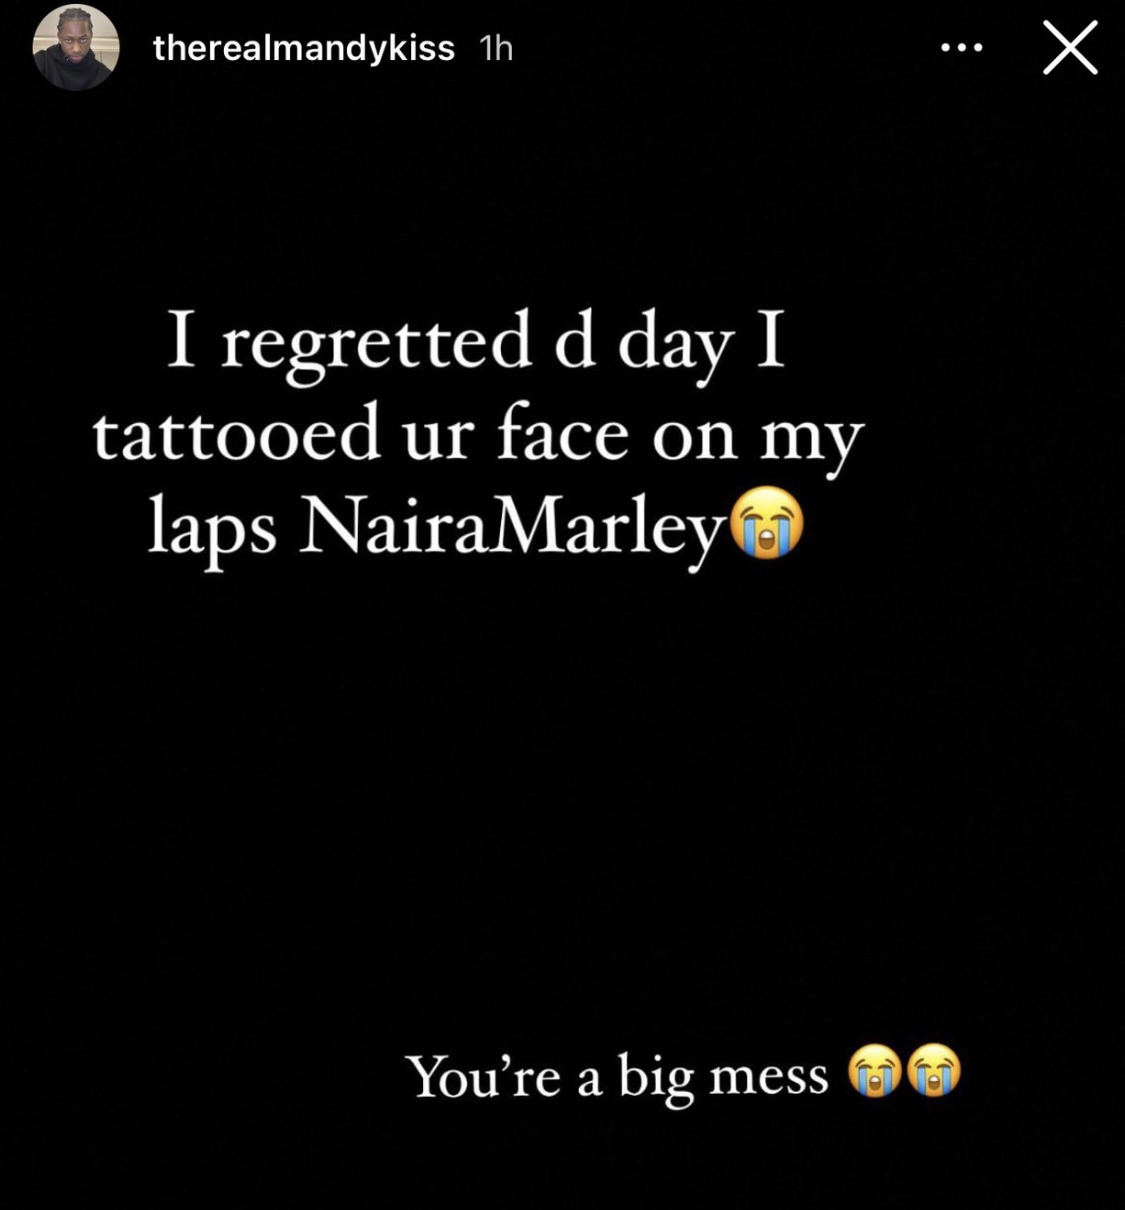 I regret ever tattooing your face on my lap - Influencer Mandy Kiss blasts Naira Marley [photos]